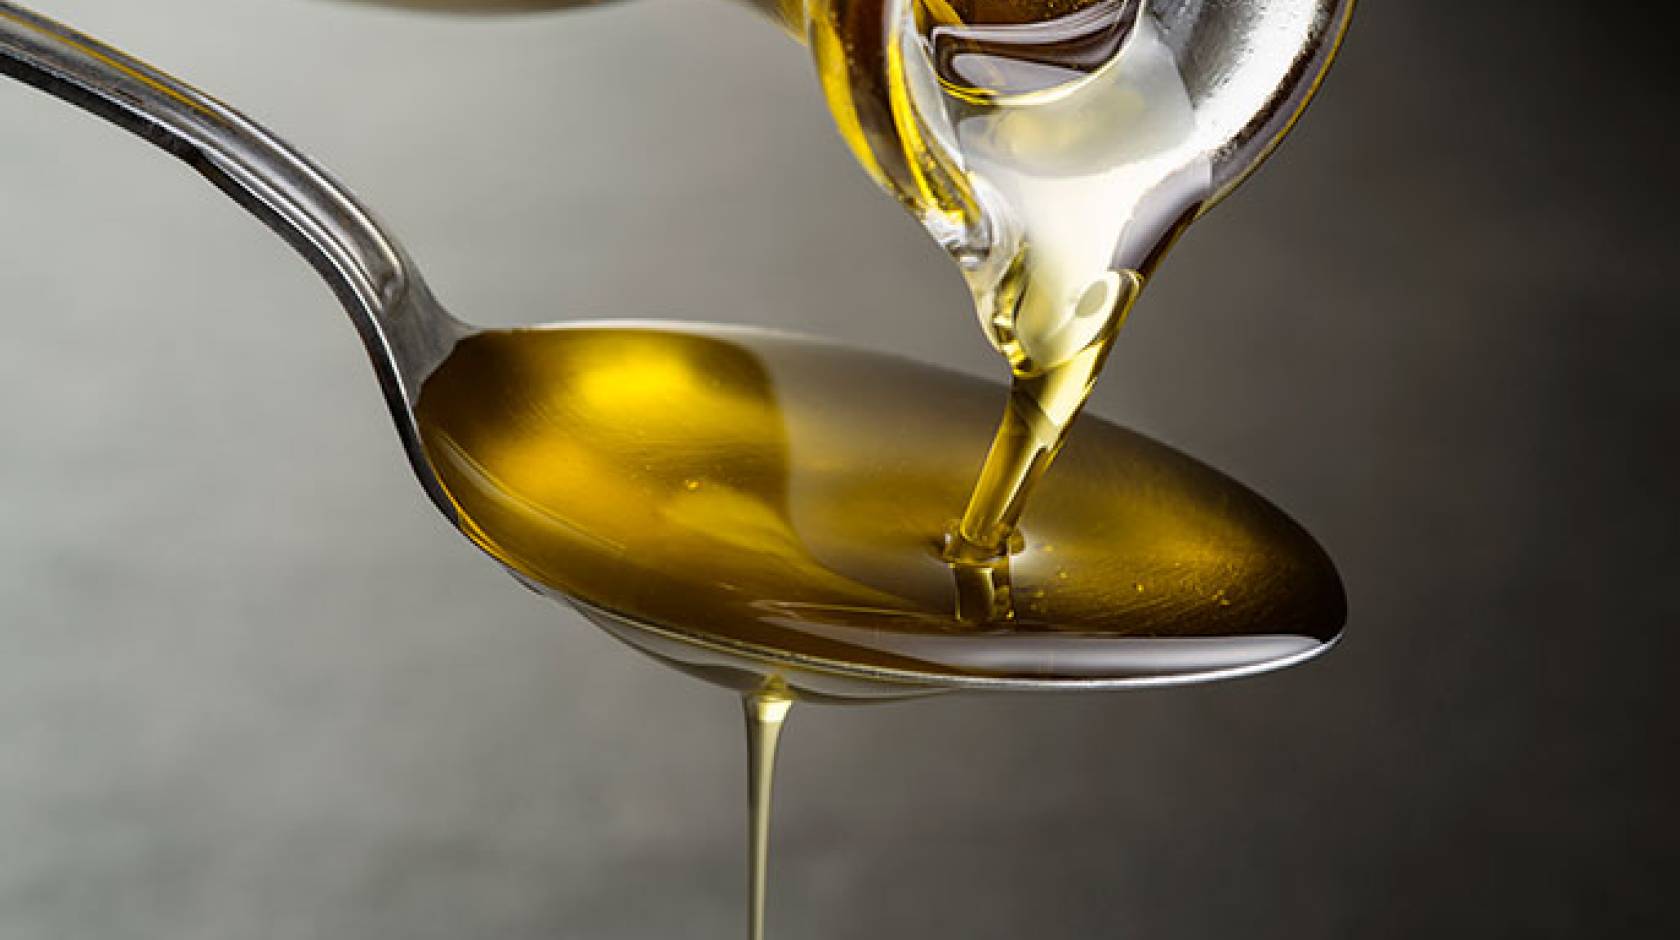 What Are the Uses for Different Edible Oils When Cooking? - Holar